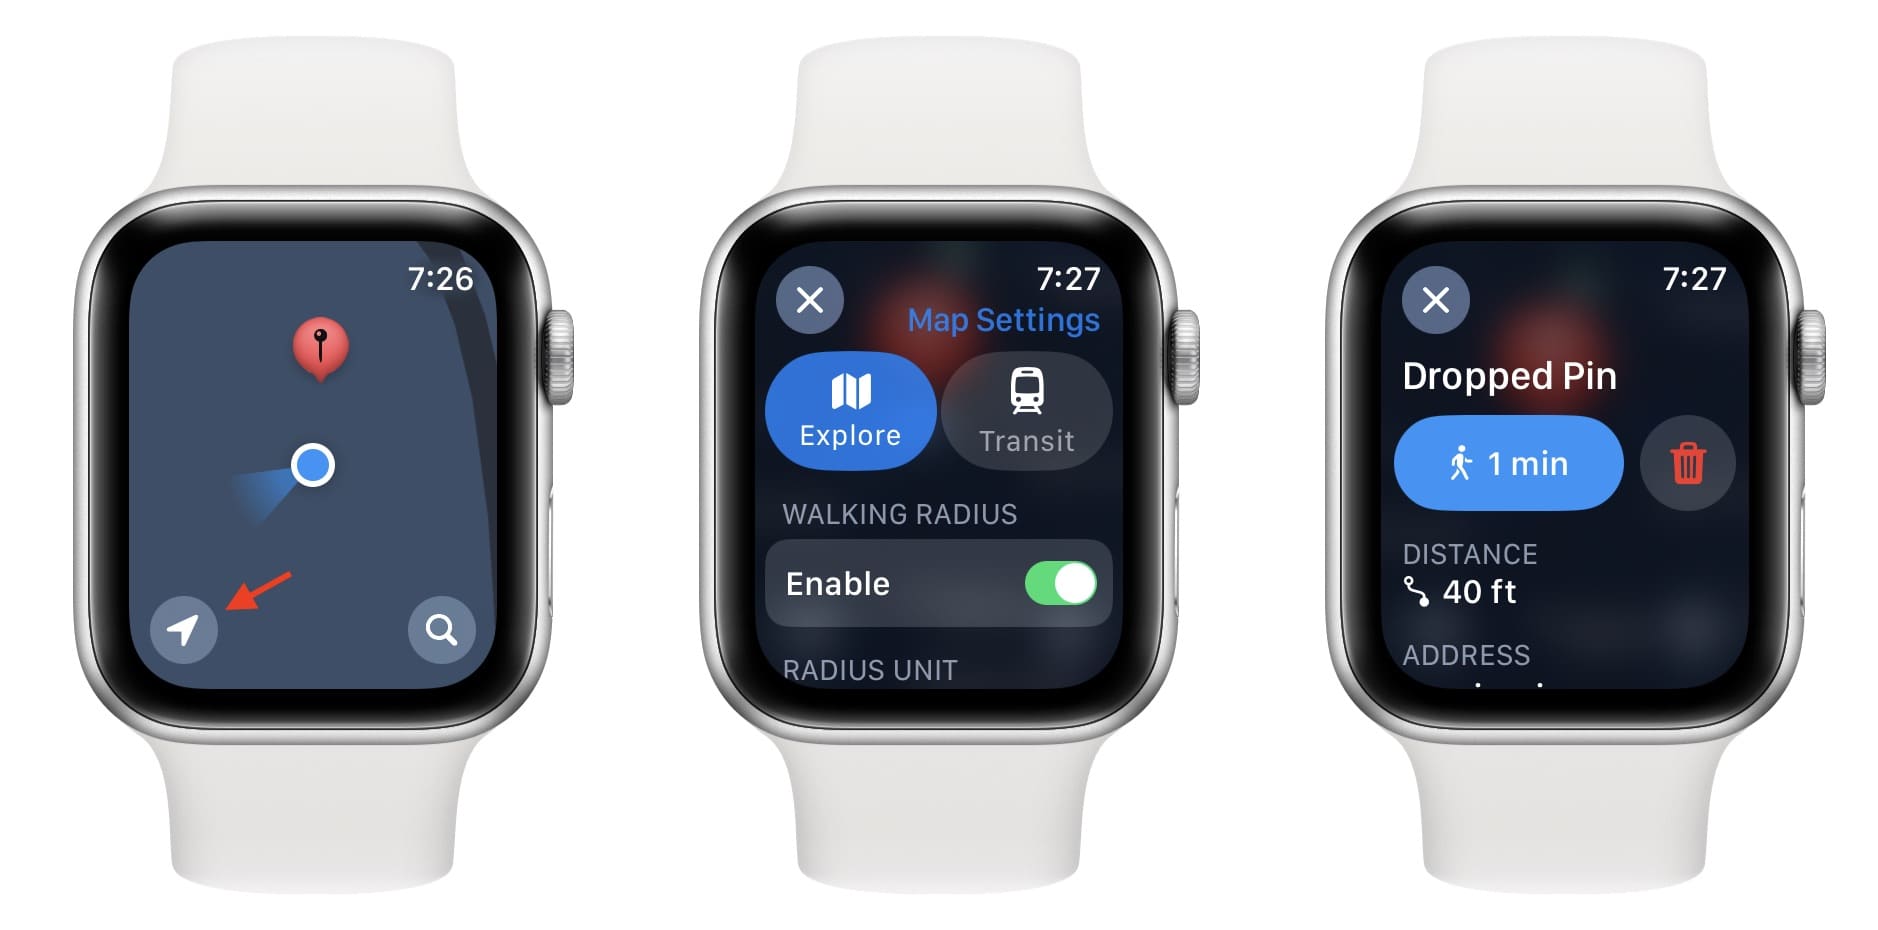 View your surroundings in Apple Maps app on Watch